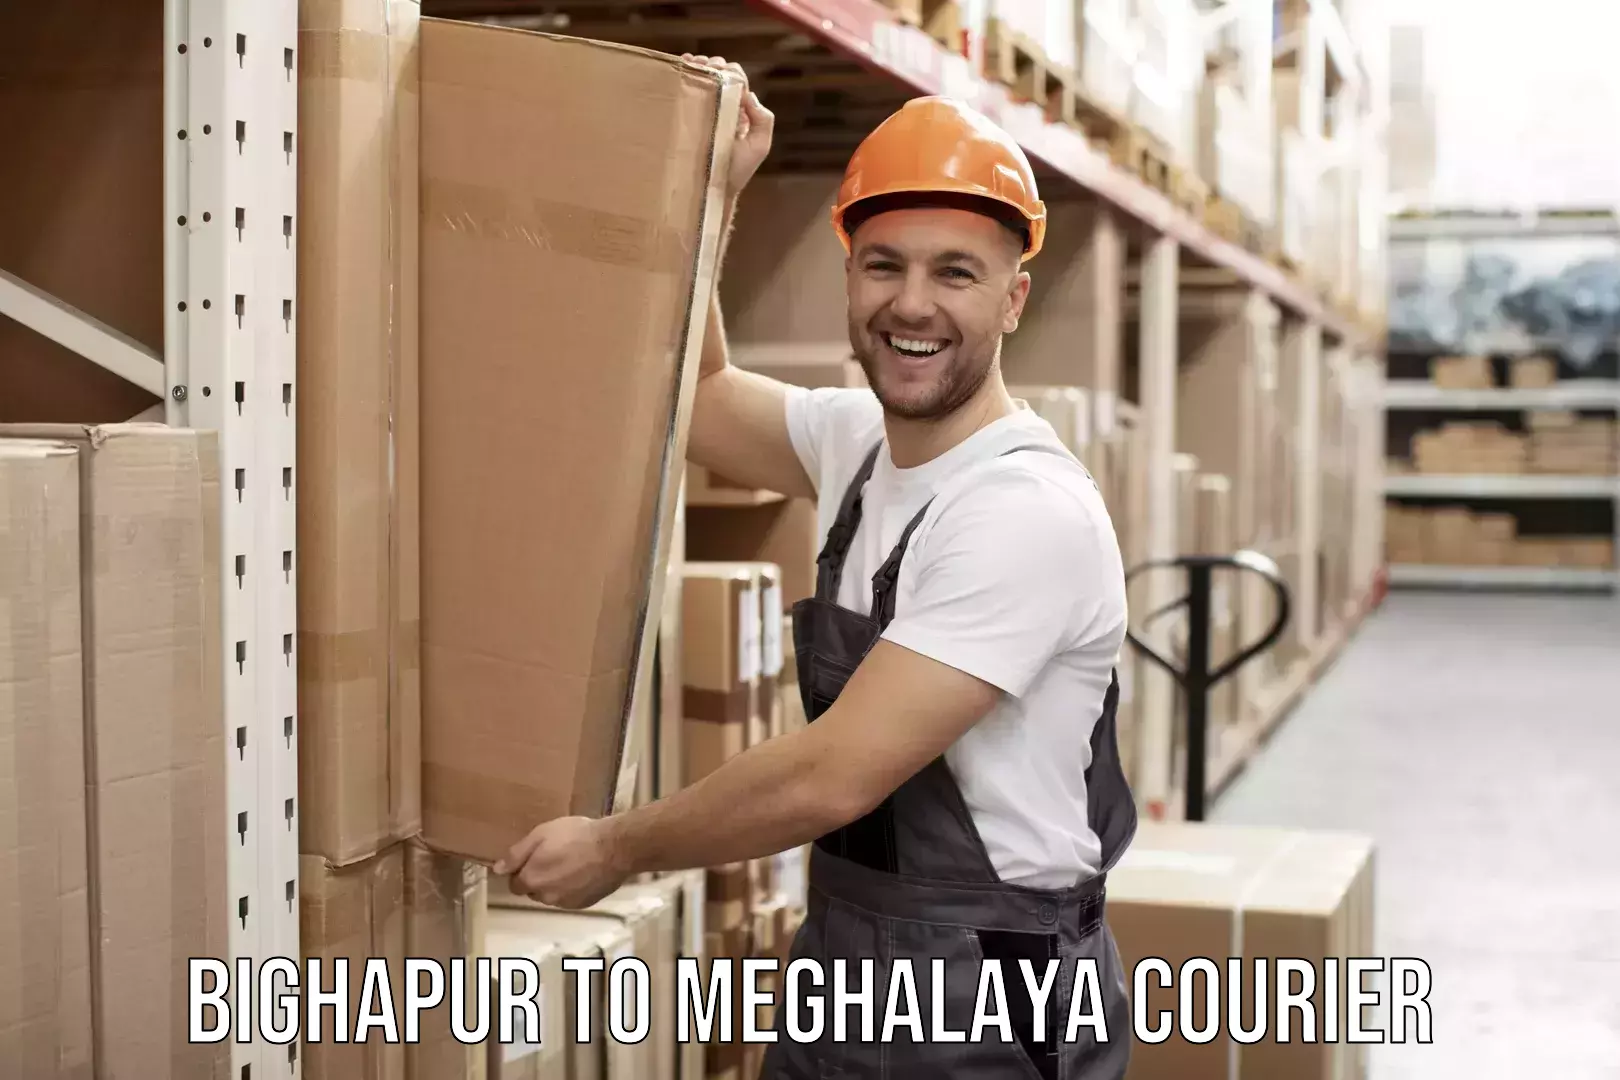 Trusted relocation experts Bighapur to Meghalaya